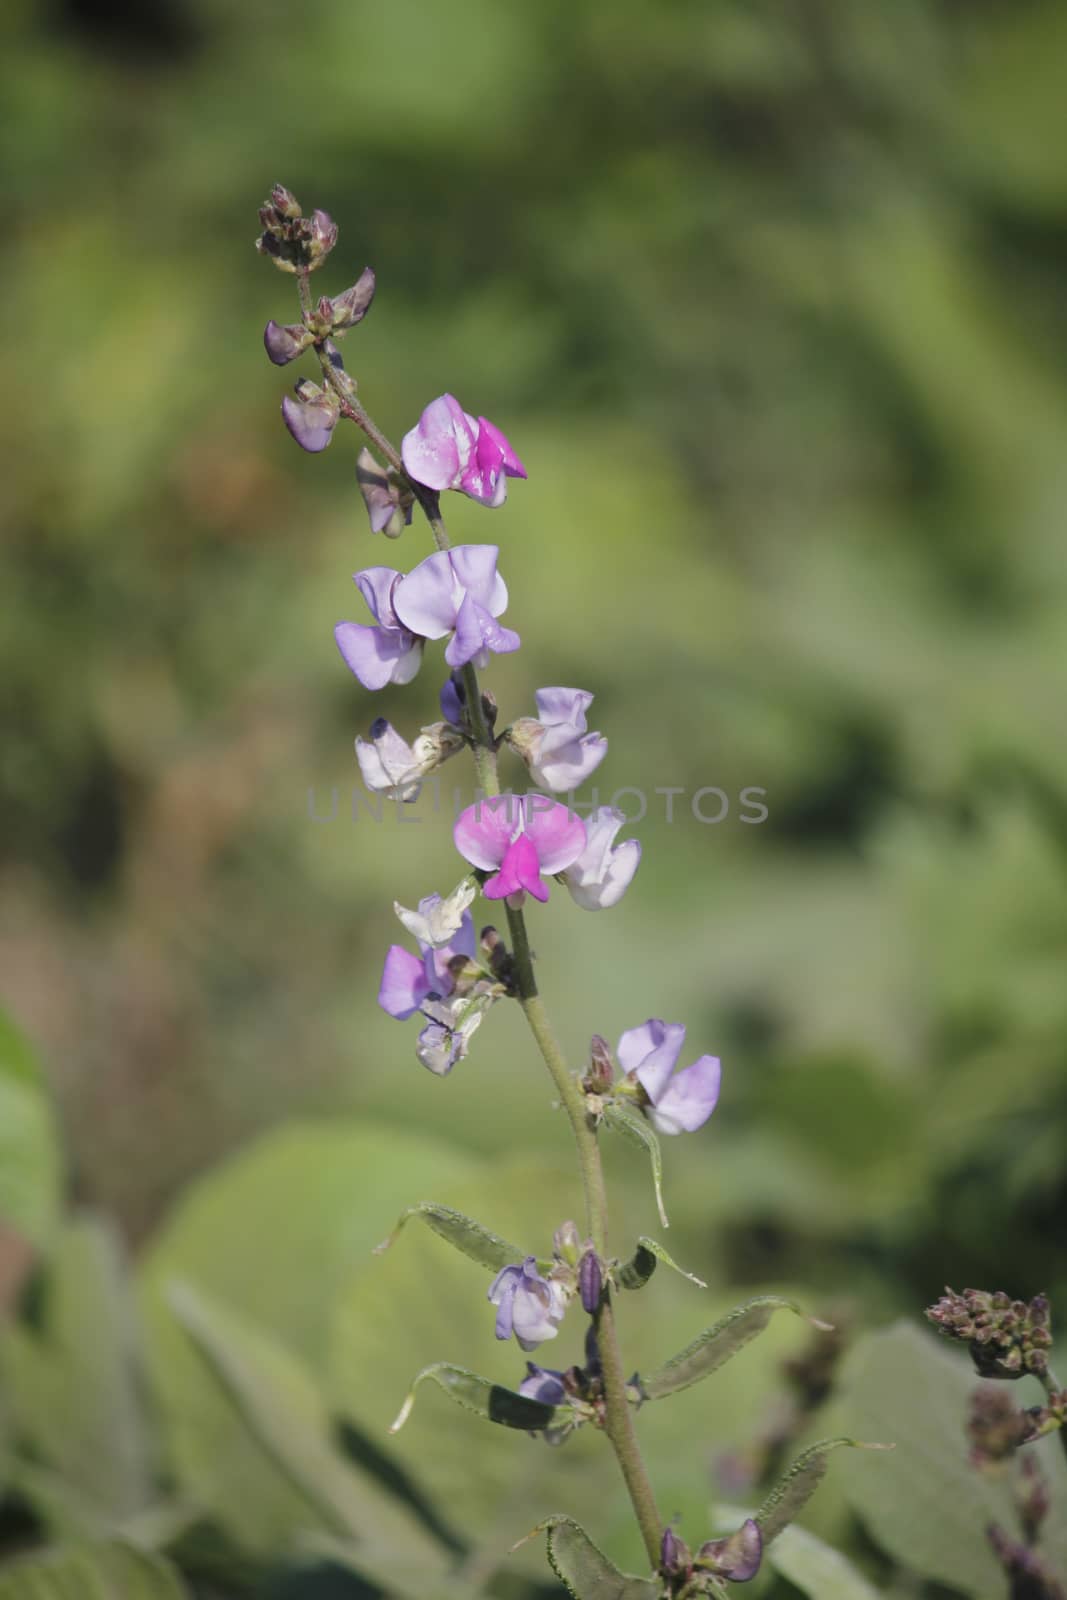 Flowers of Lablab purpureus. It is a species of bean in the family Fabaceae